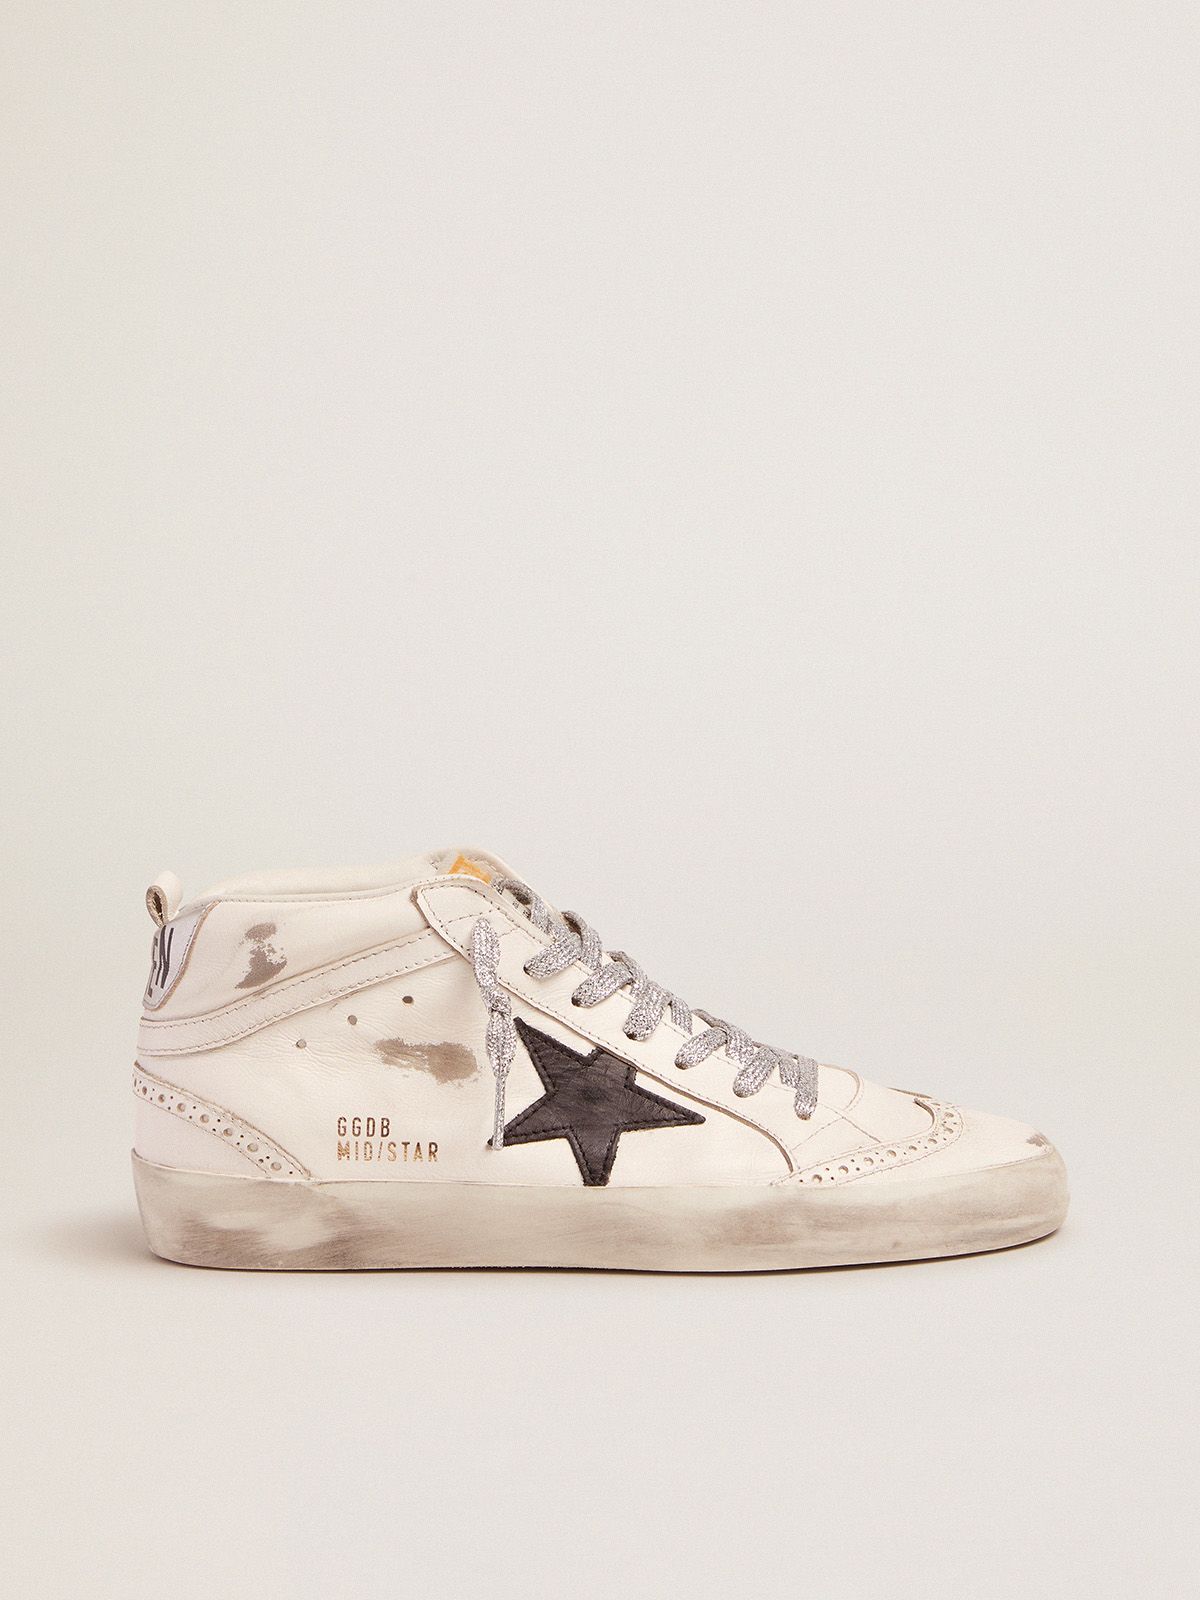 Mid-Star sneakers with laminated heel tab and glittery laces | 